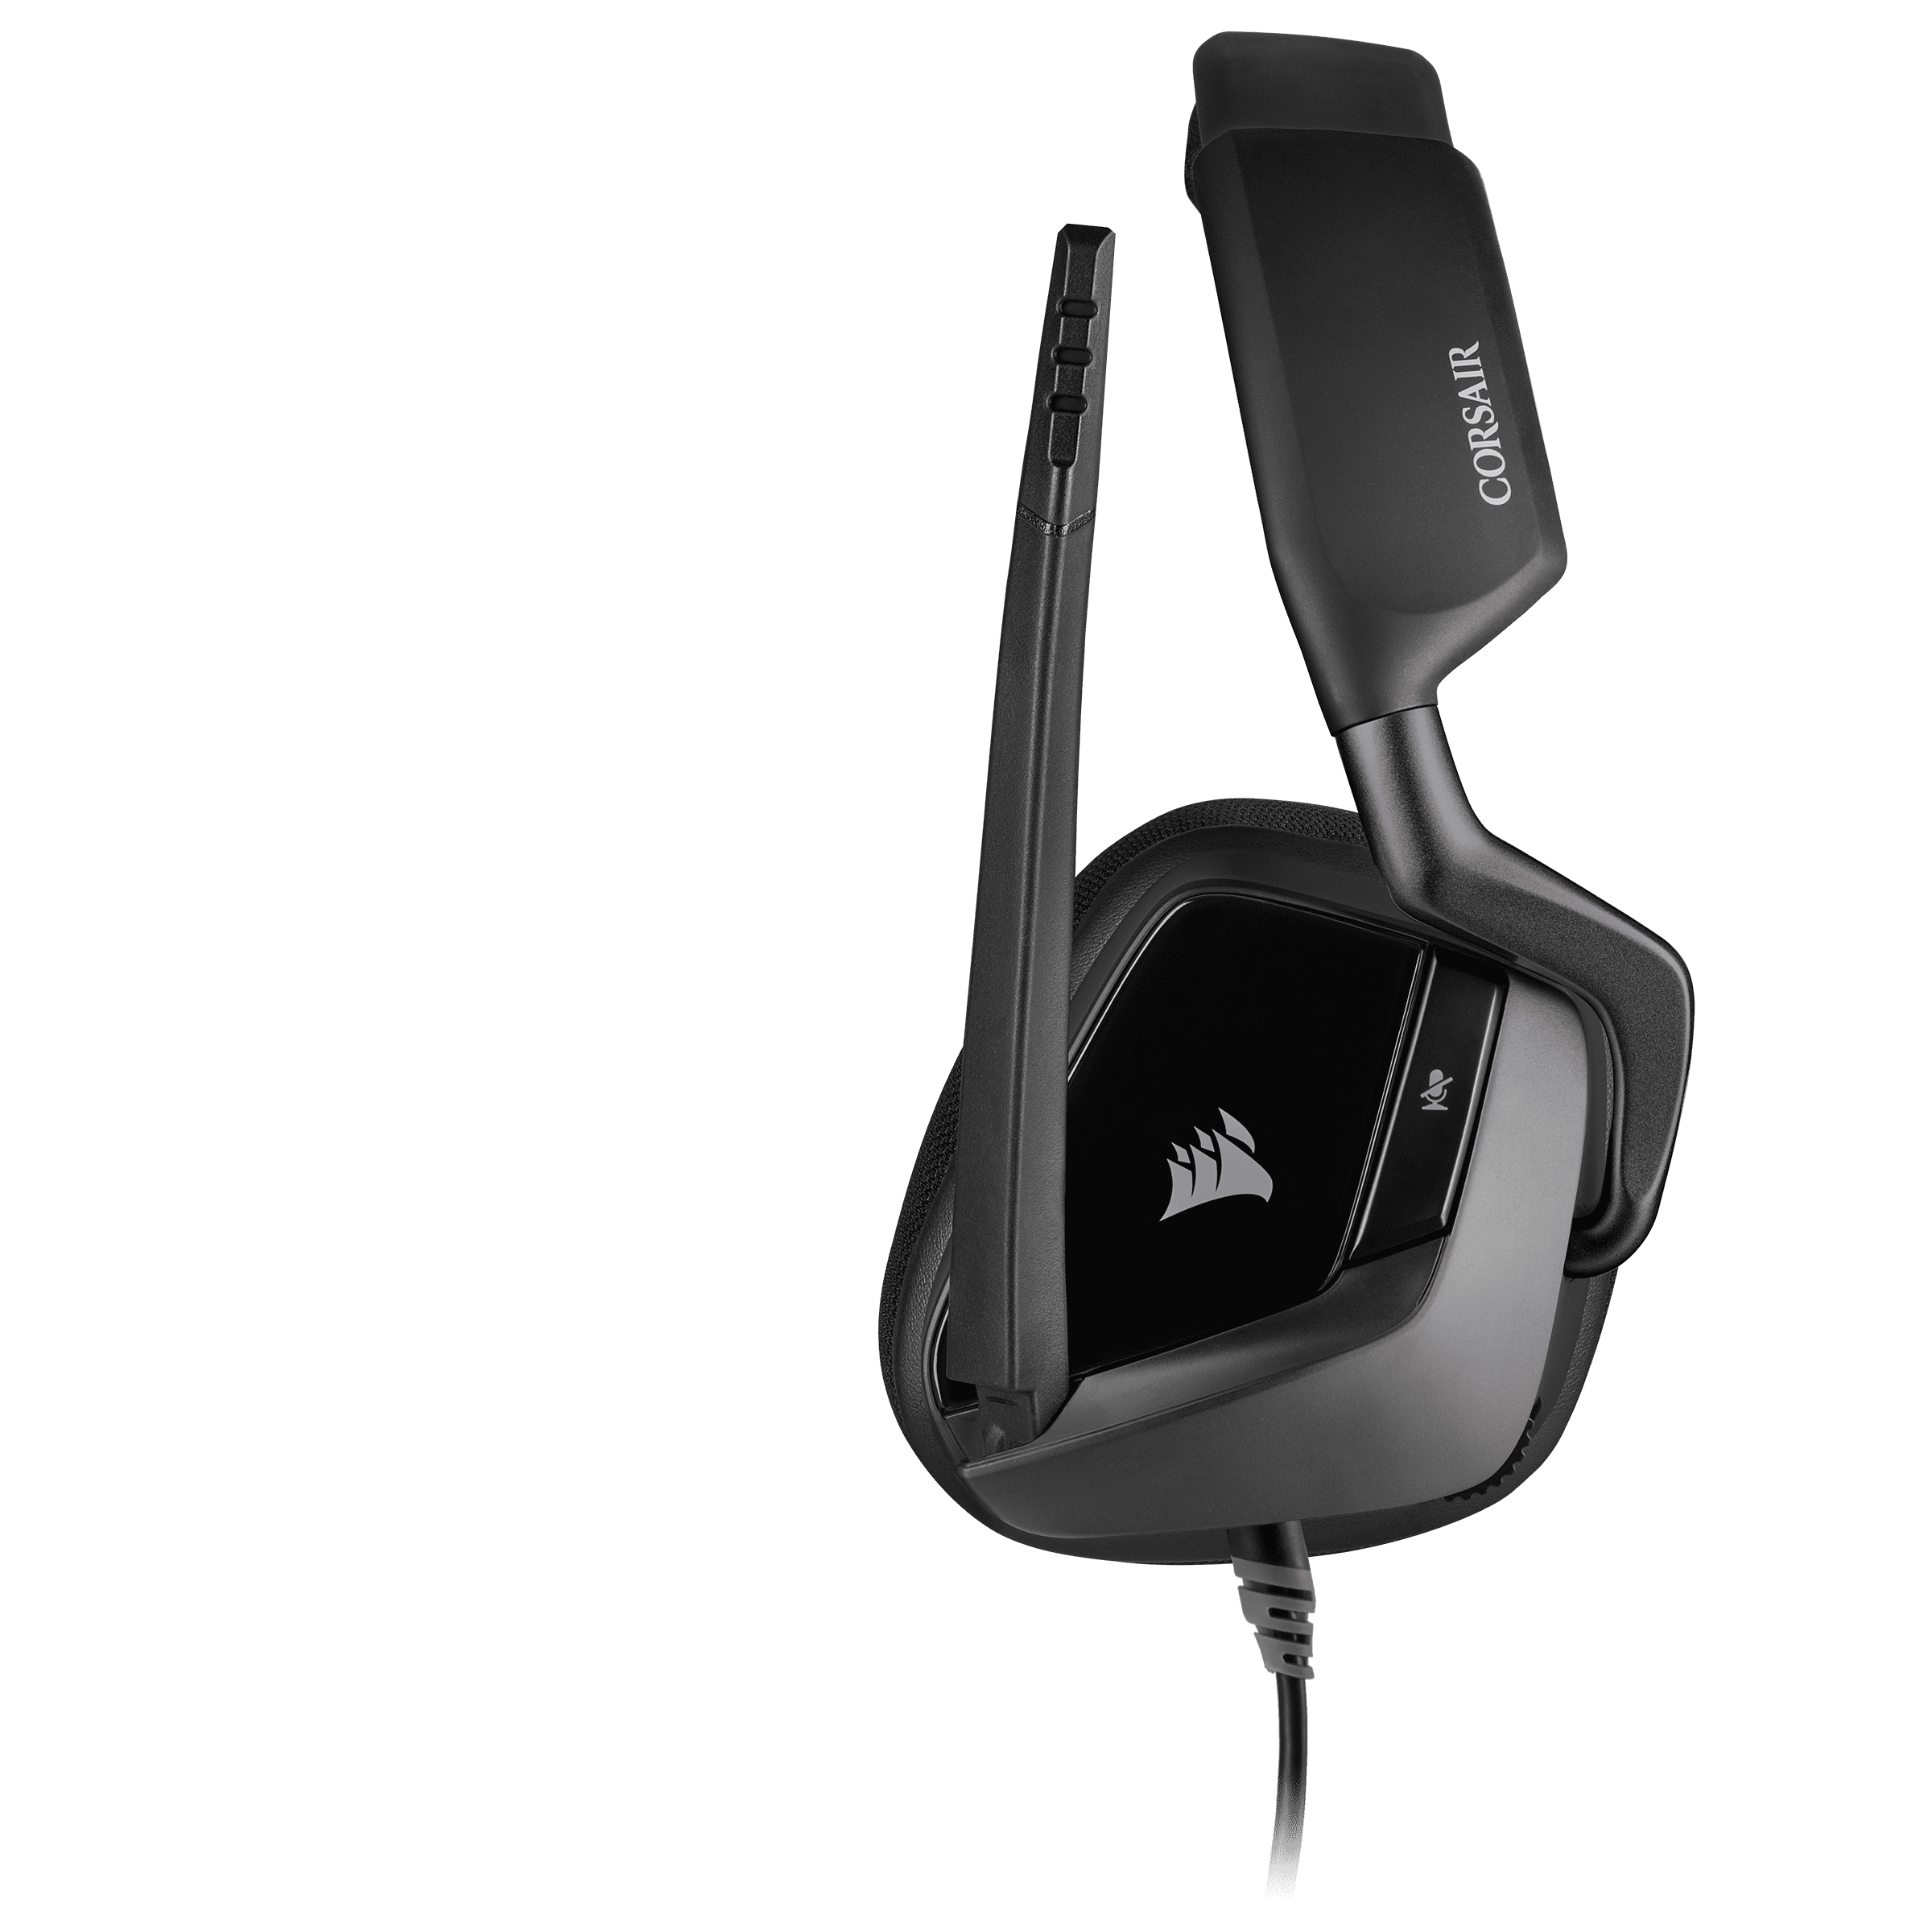 Corsair Void Elite Stereo Gaming Headset - Carbon; Multi-Platform compatible with PC, PS4, Xbox One, and Devices via a Universal 3.5mm connector and Included Cable - Walmart.com